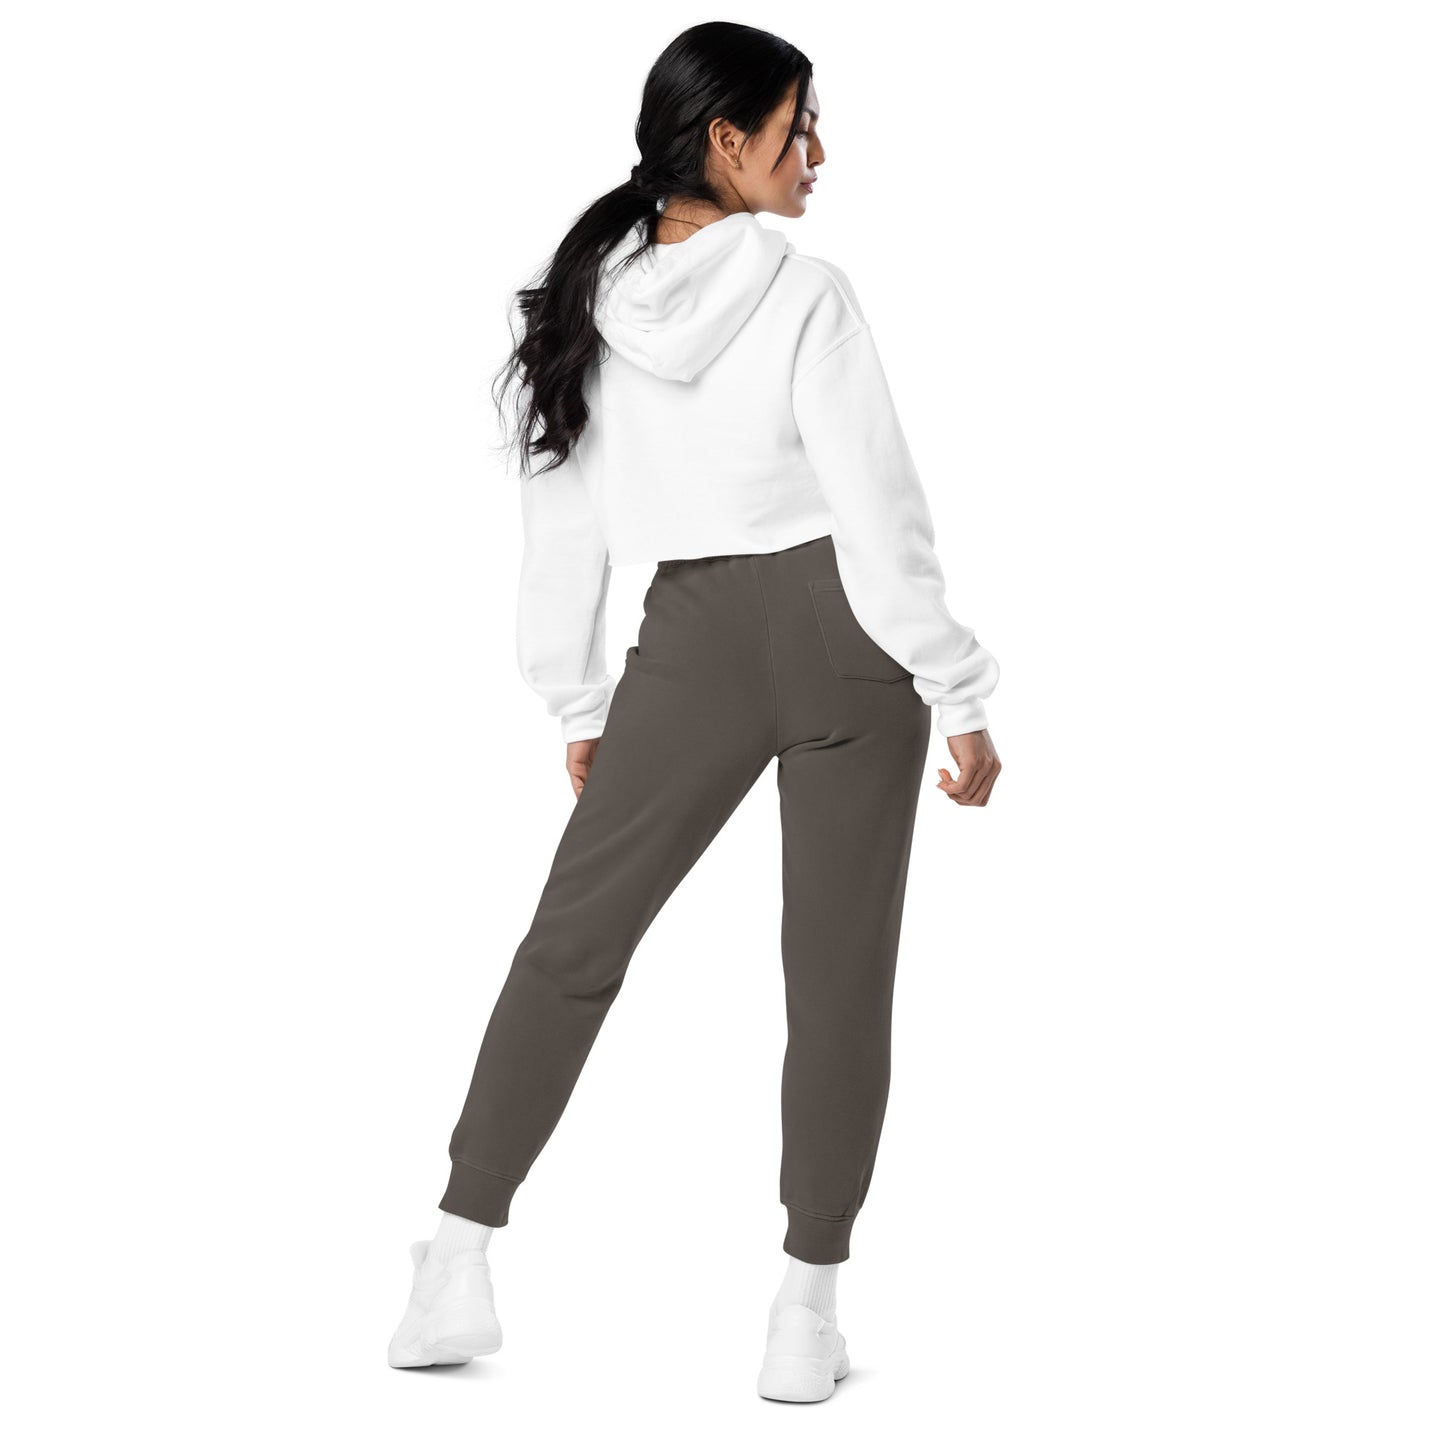 08 - Embroidered Women's Joggers